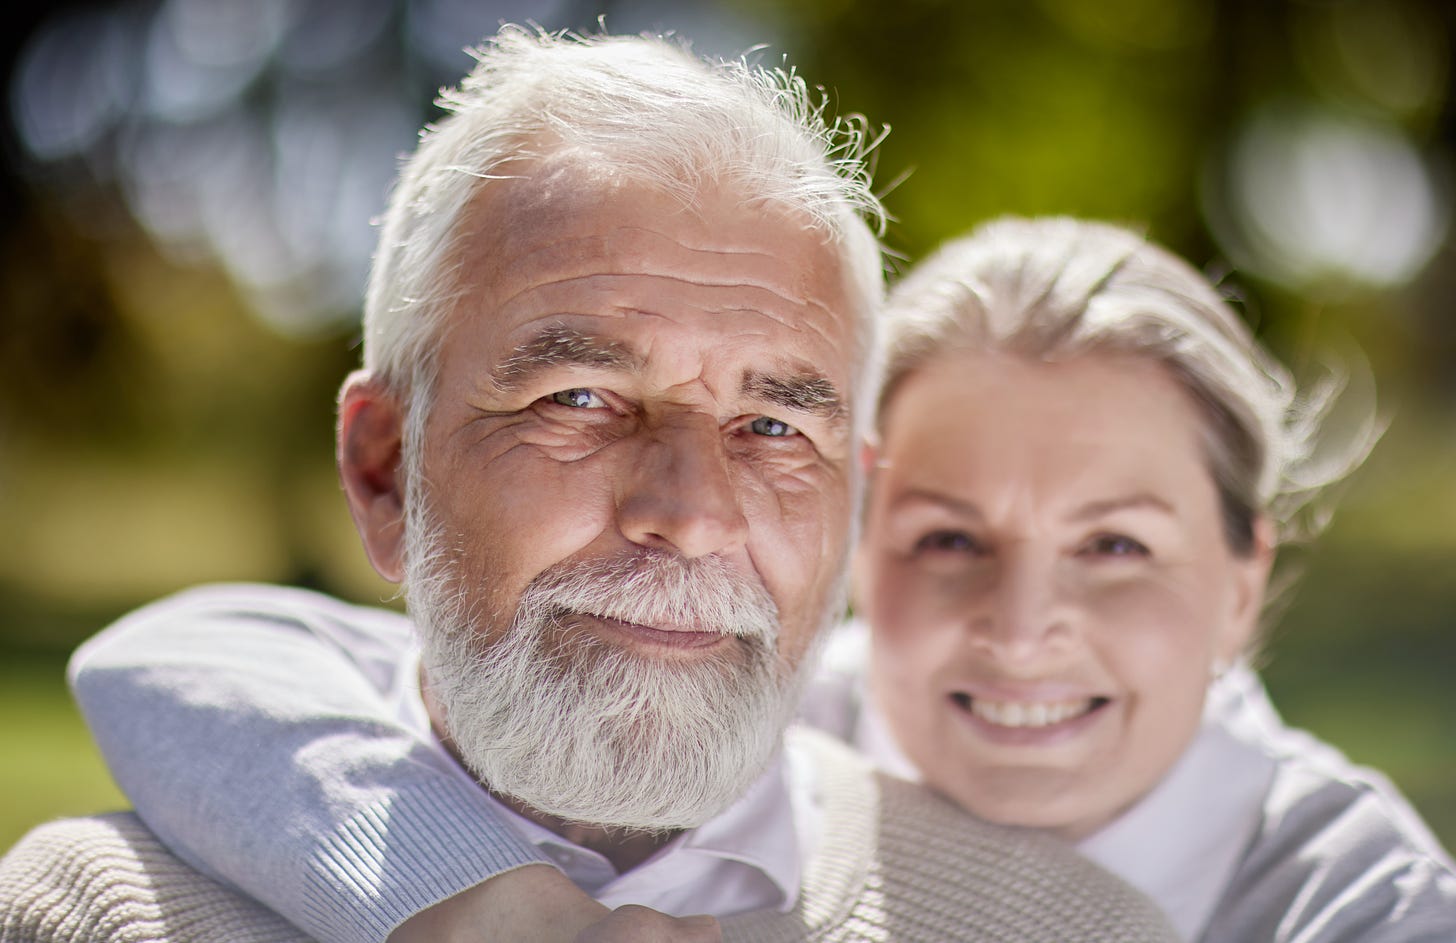 Older white man with white hair and beard looks into camera. A younger white woman in background has her right arm lovingly around his neck and is out of focus.